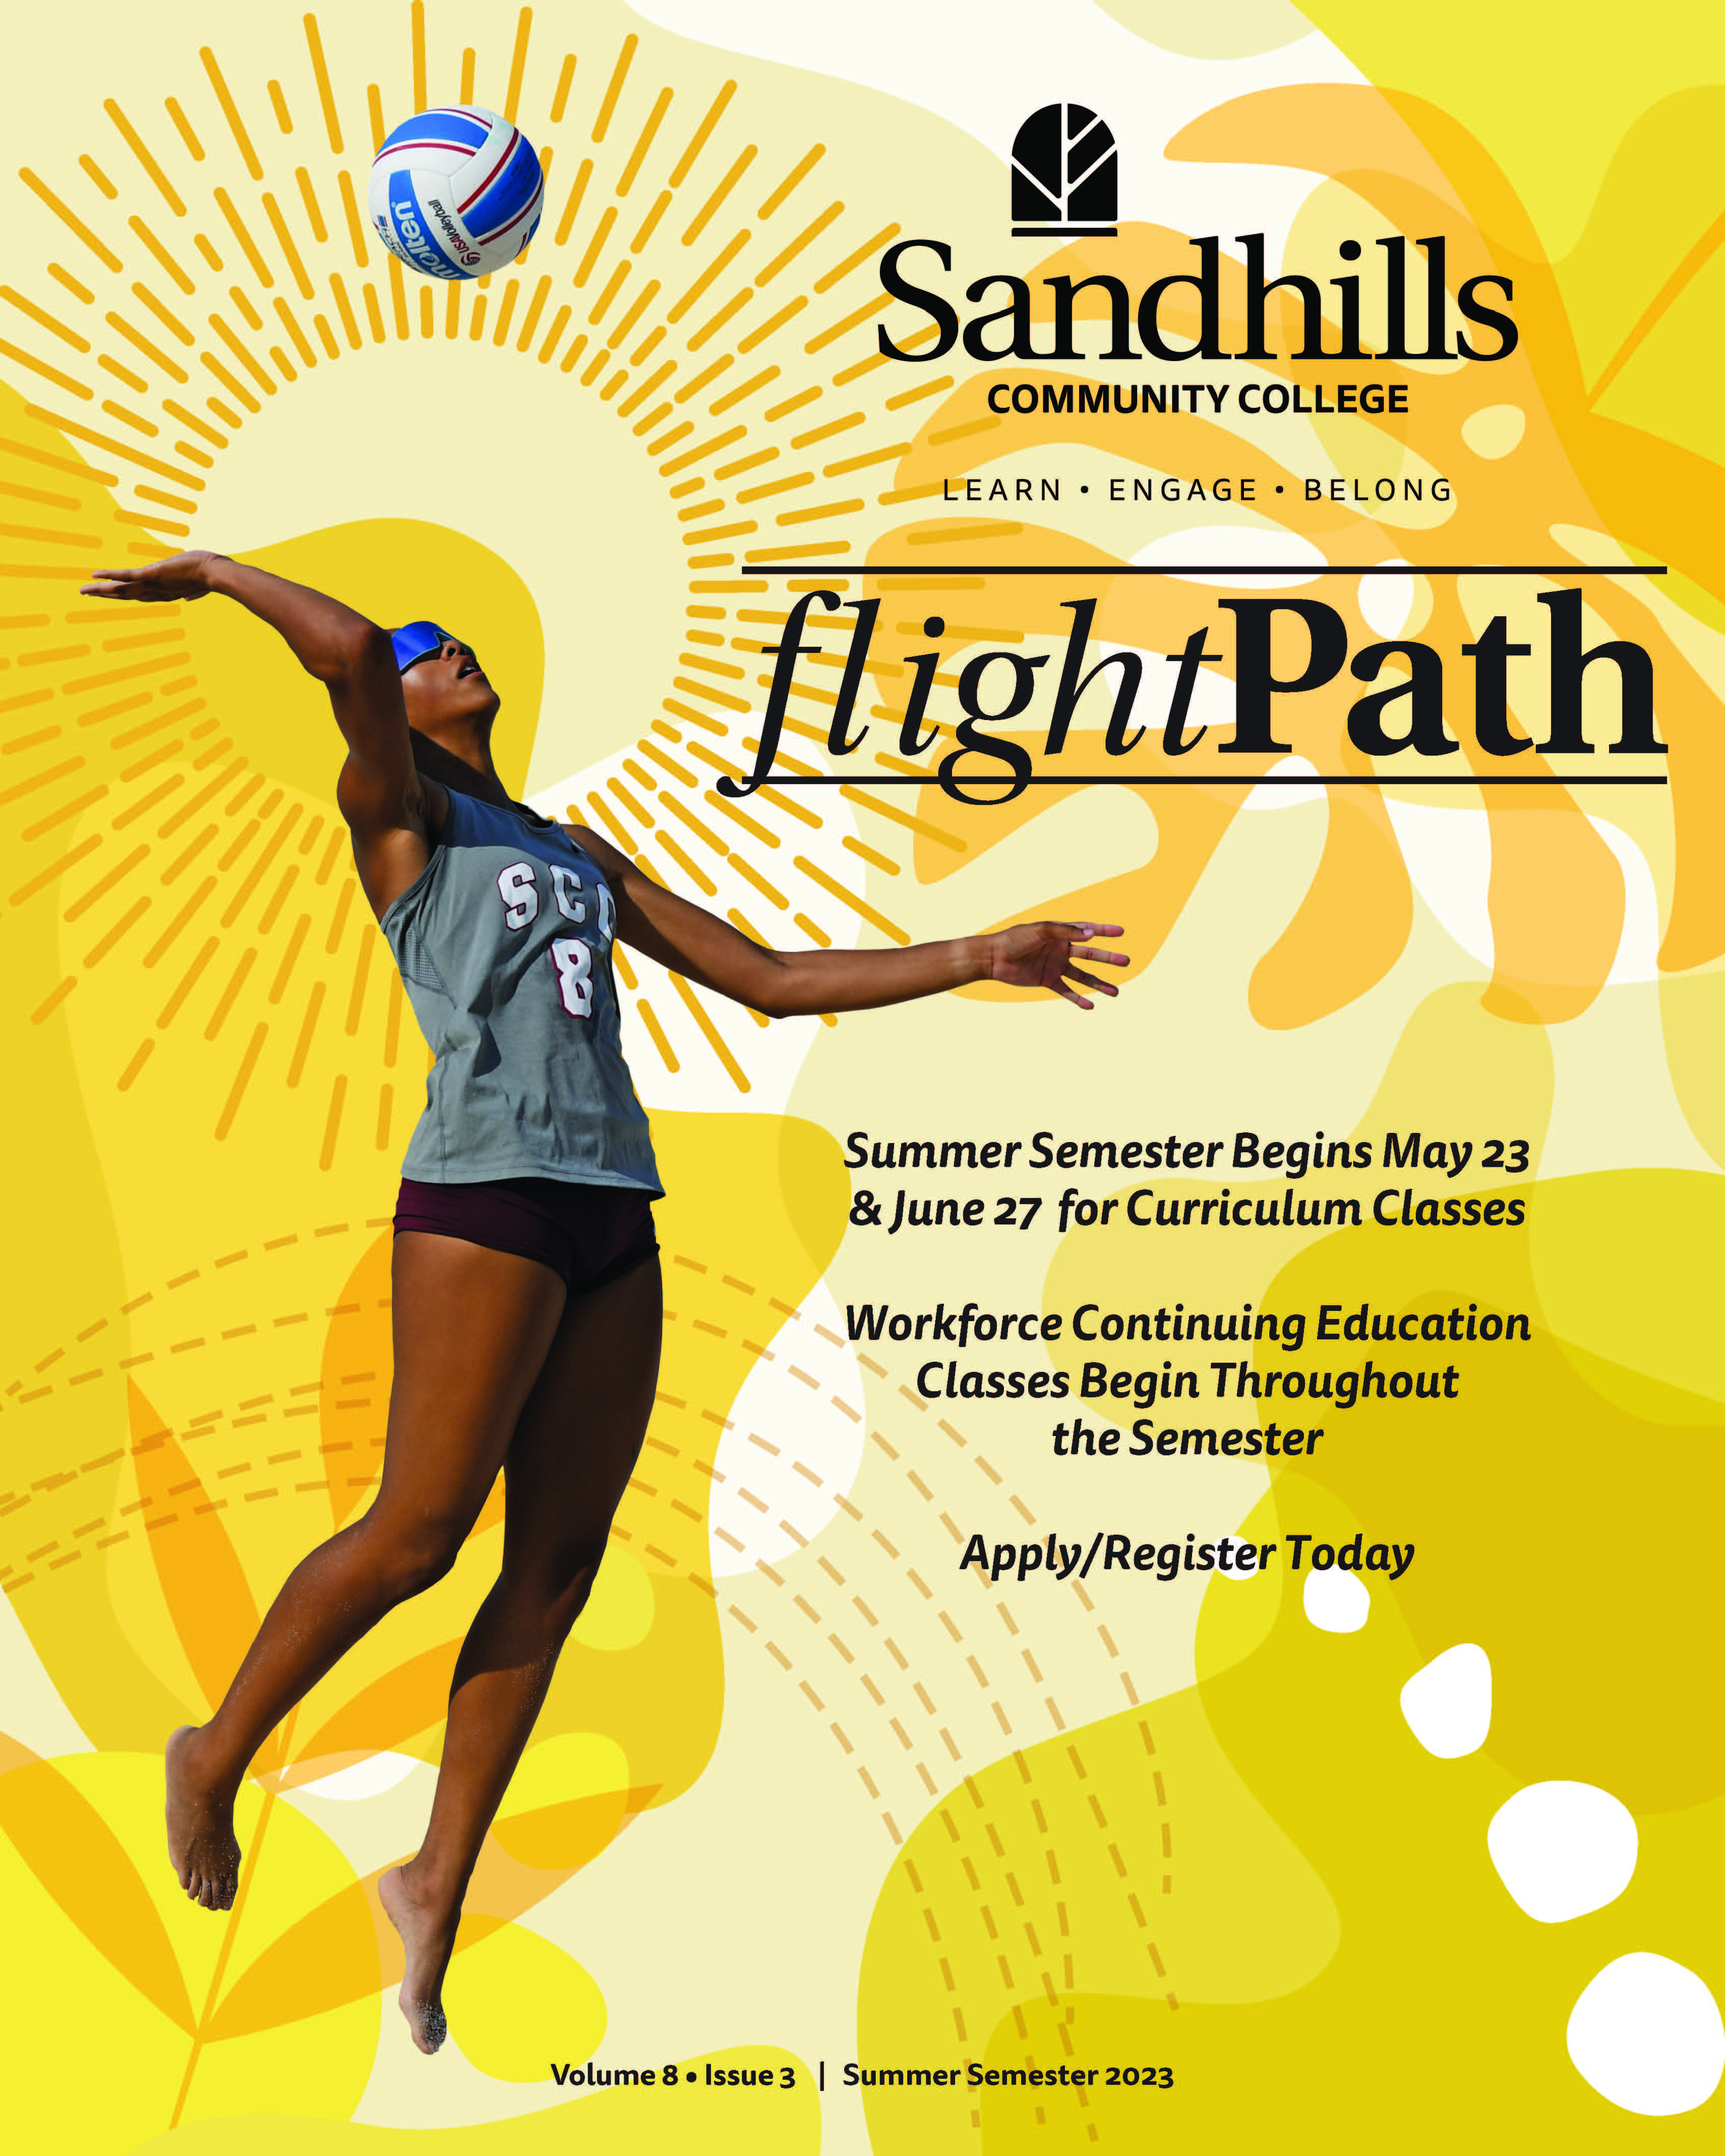 flightPath Summer 2023 Cover - The summer semester begins May 23 & June 27 for Curriculum Classes. Workforce Continuing Education classes begin throughout the semester. Apply/Register today.